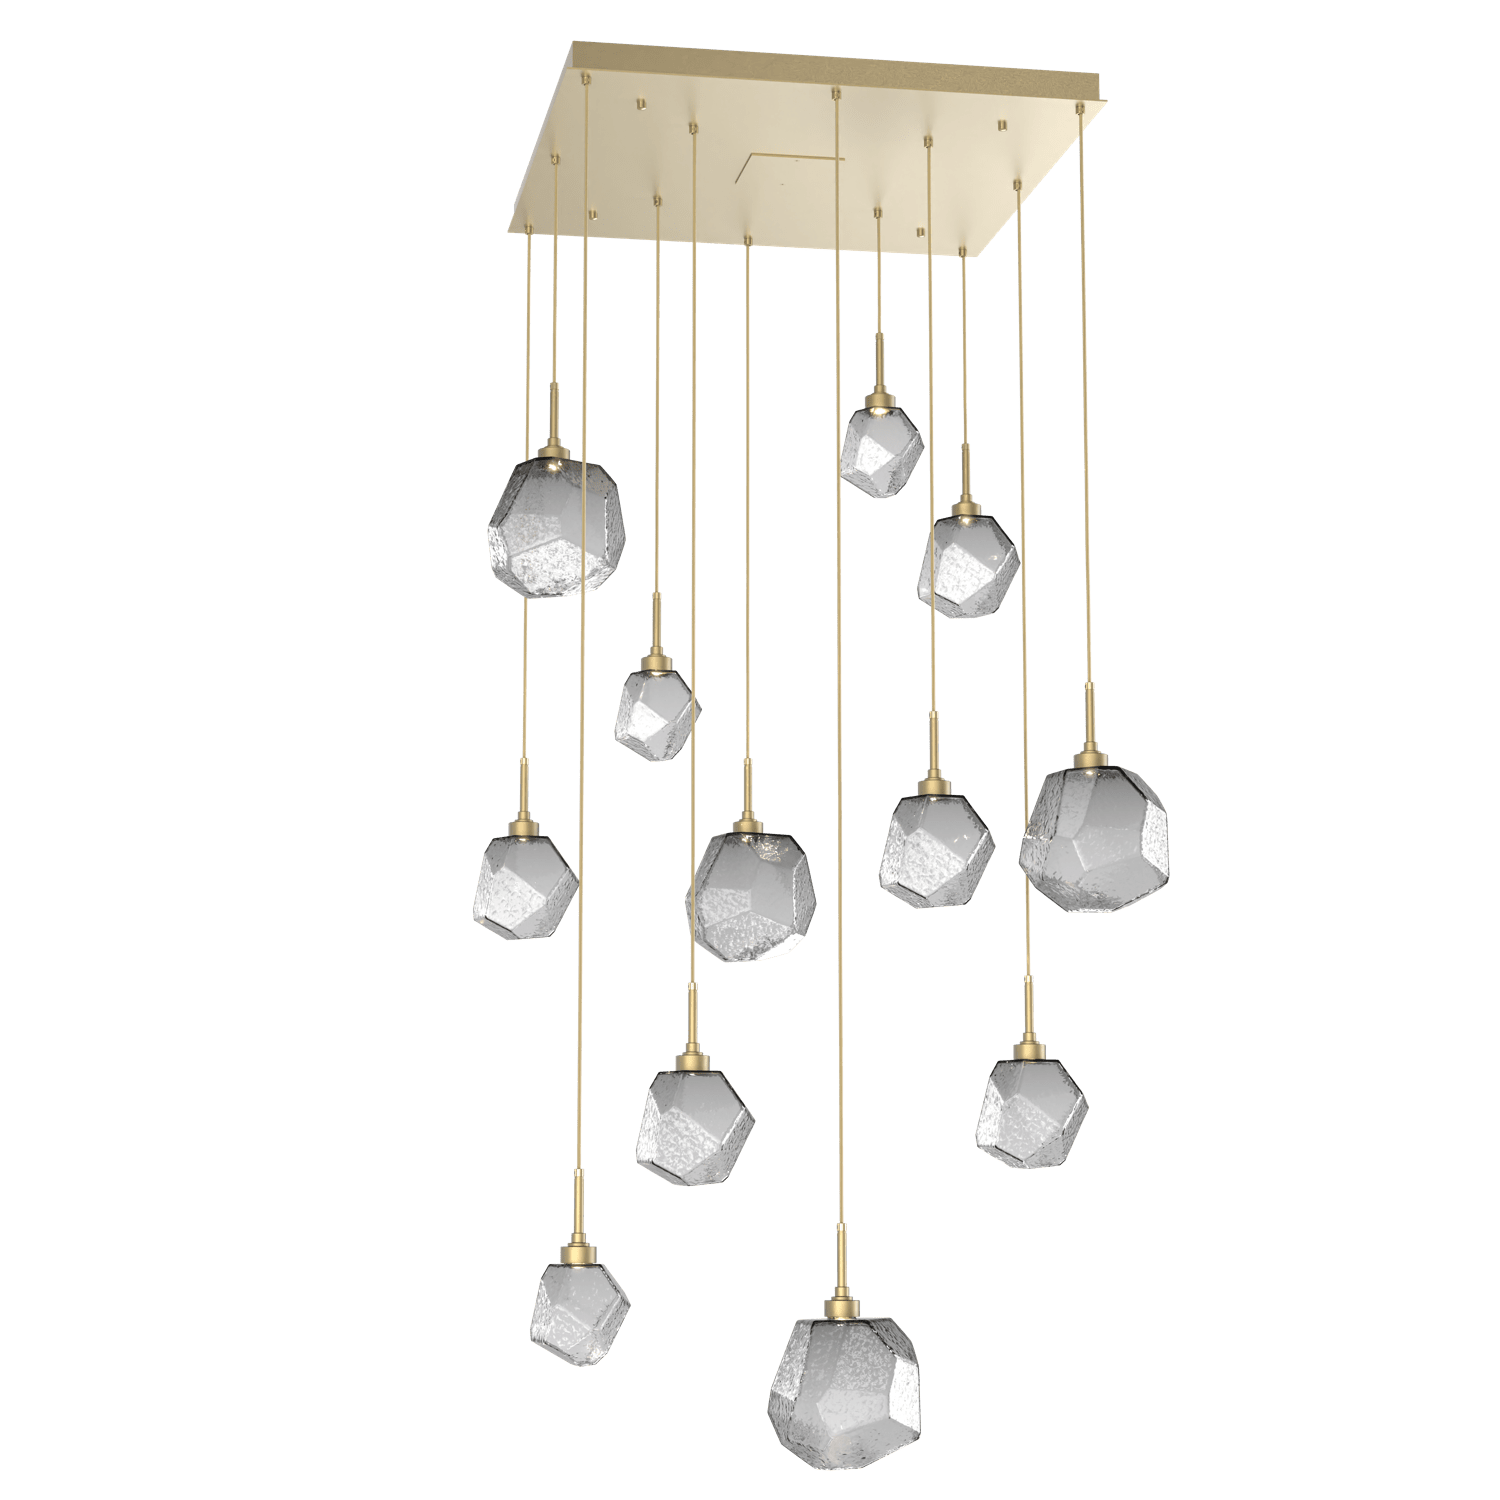 CHB0039-12-GB-S-Hammerton-Studio-Gem-12-light-square-pendant-chandelier-with-gilded-brass-finish-and-smoke-blown-glass-shades-and-LED-lamping